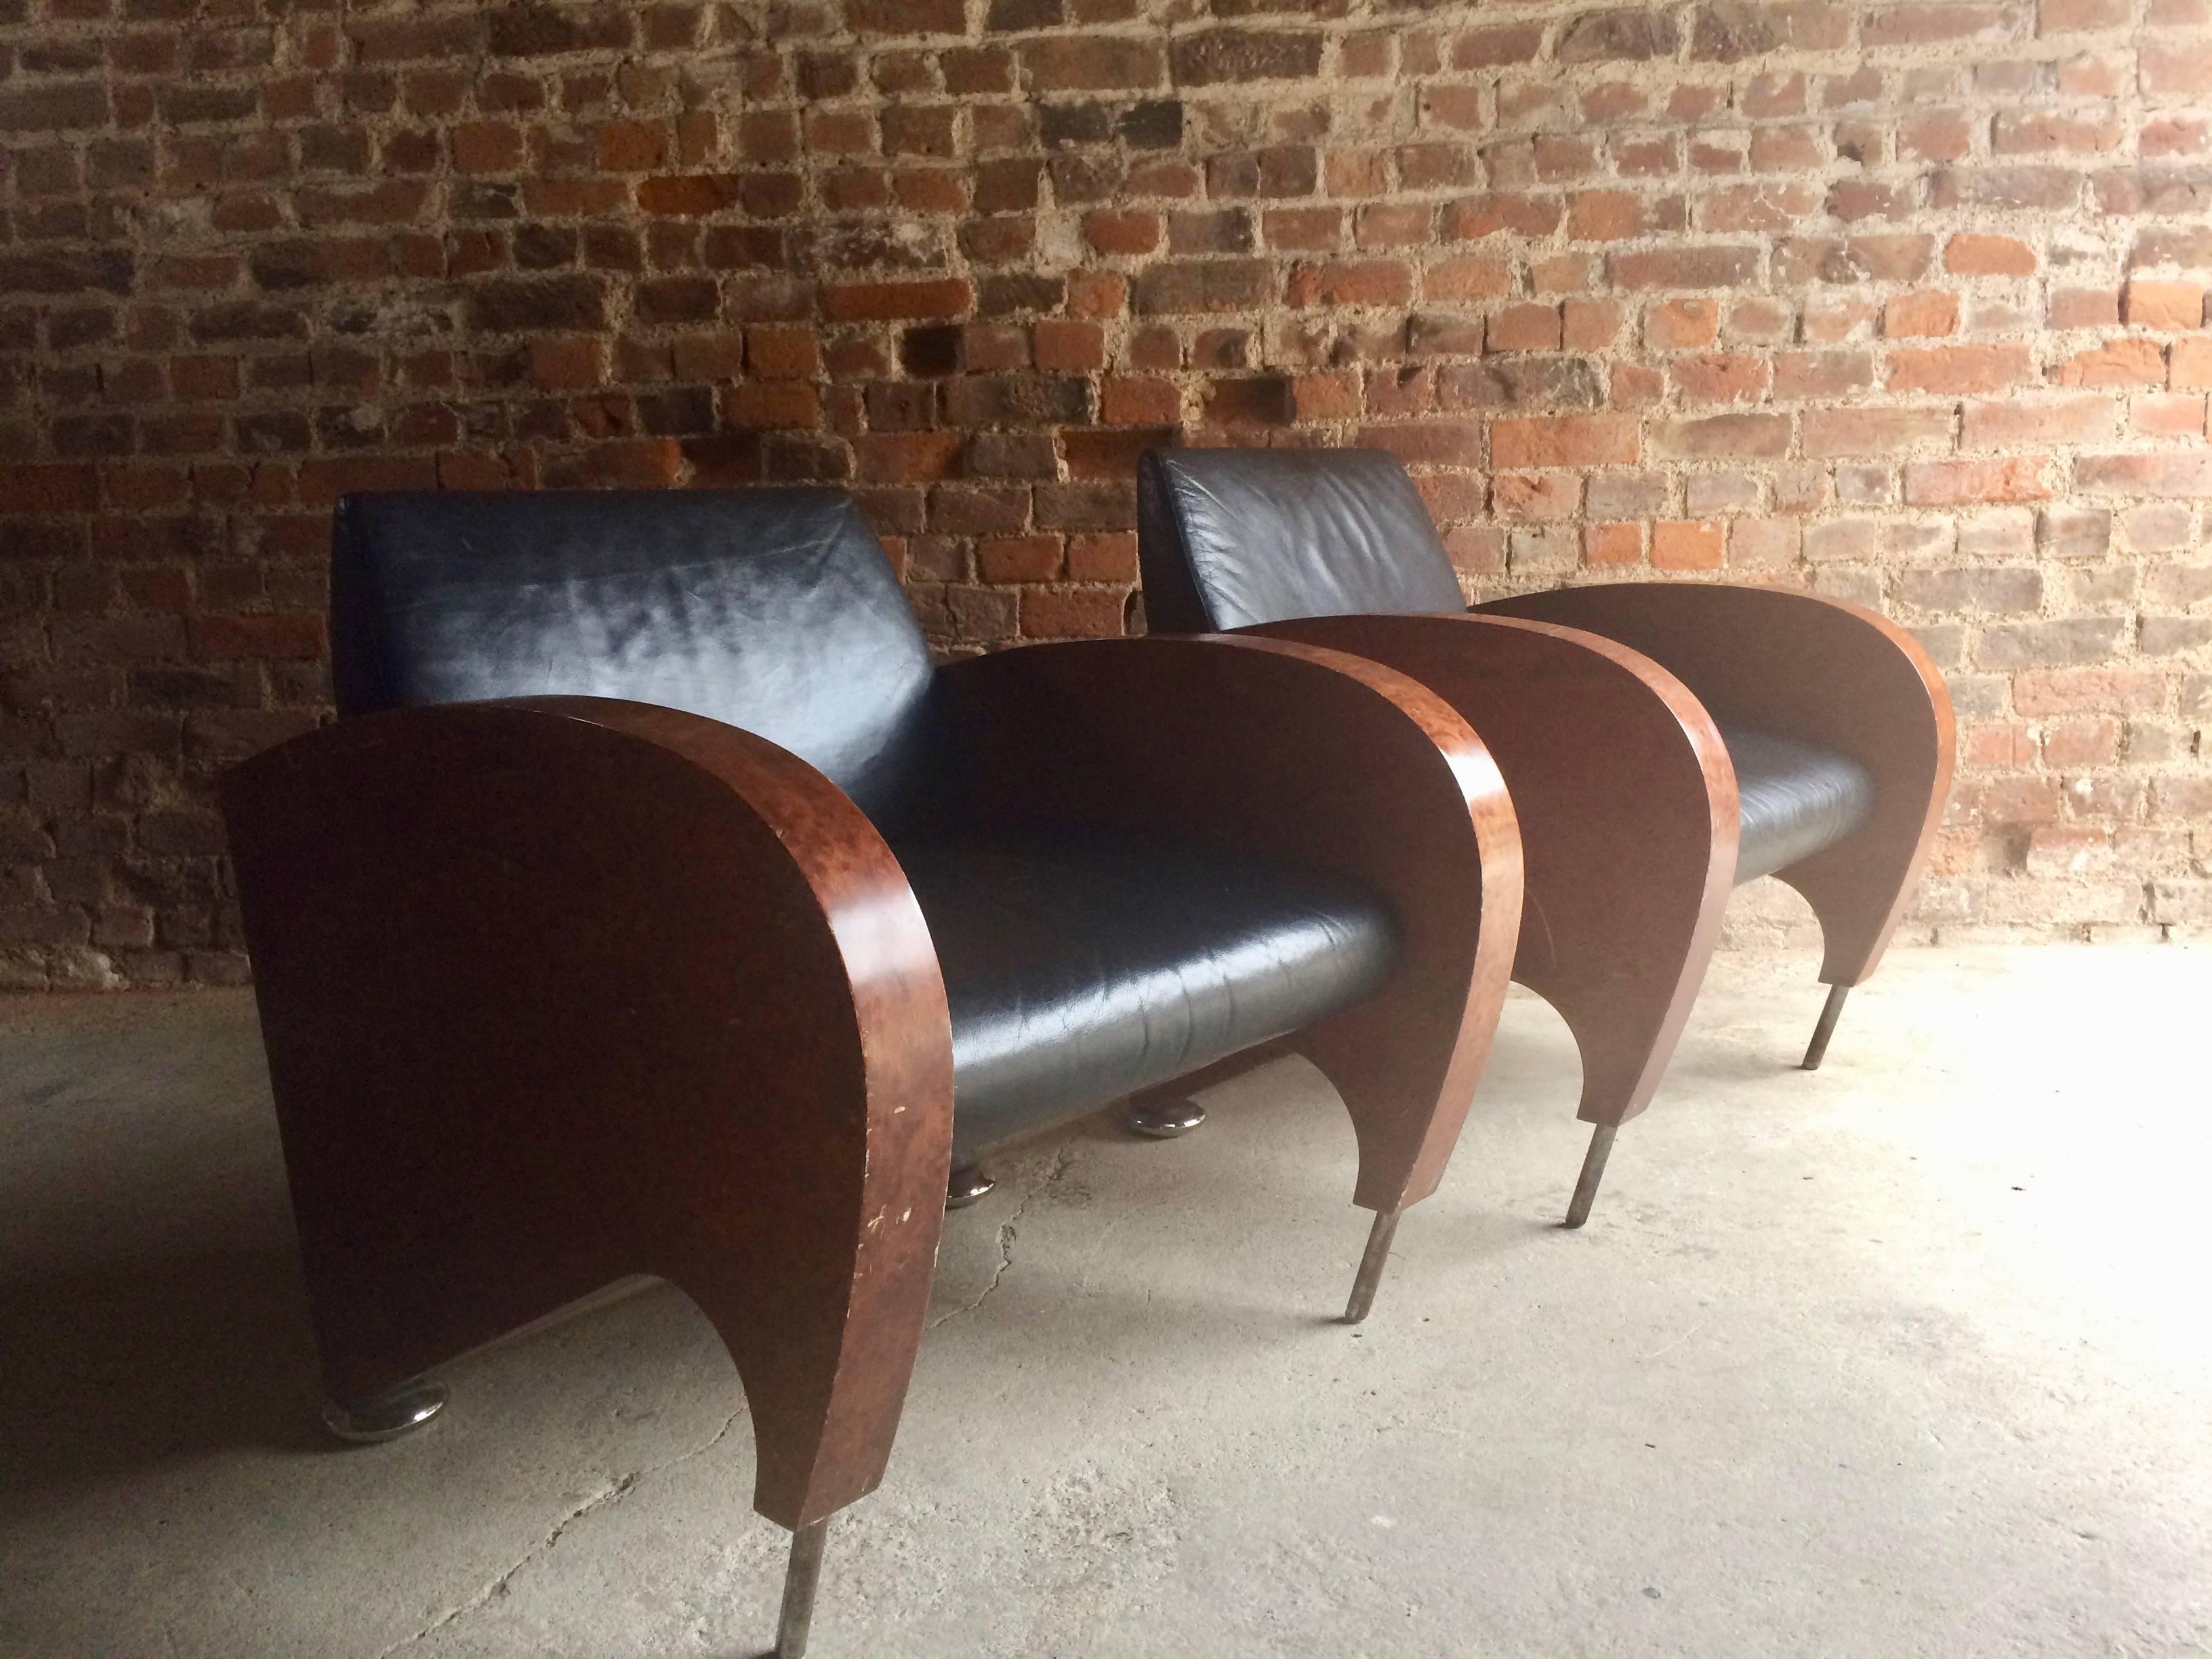 An outrageous and stunning pair of Art Deco walnut and black leather club chairs, circa 1940s, fabulous deco shaped and angled sides with chrome tube front legs and chrome bun feet to the rear, please note the leather on the chairs is in excellent